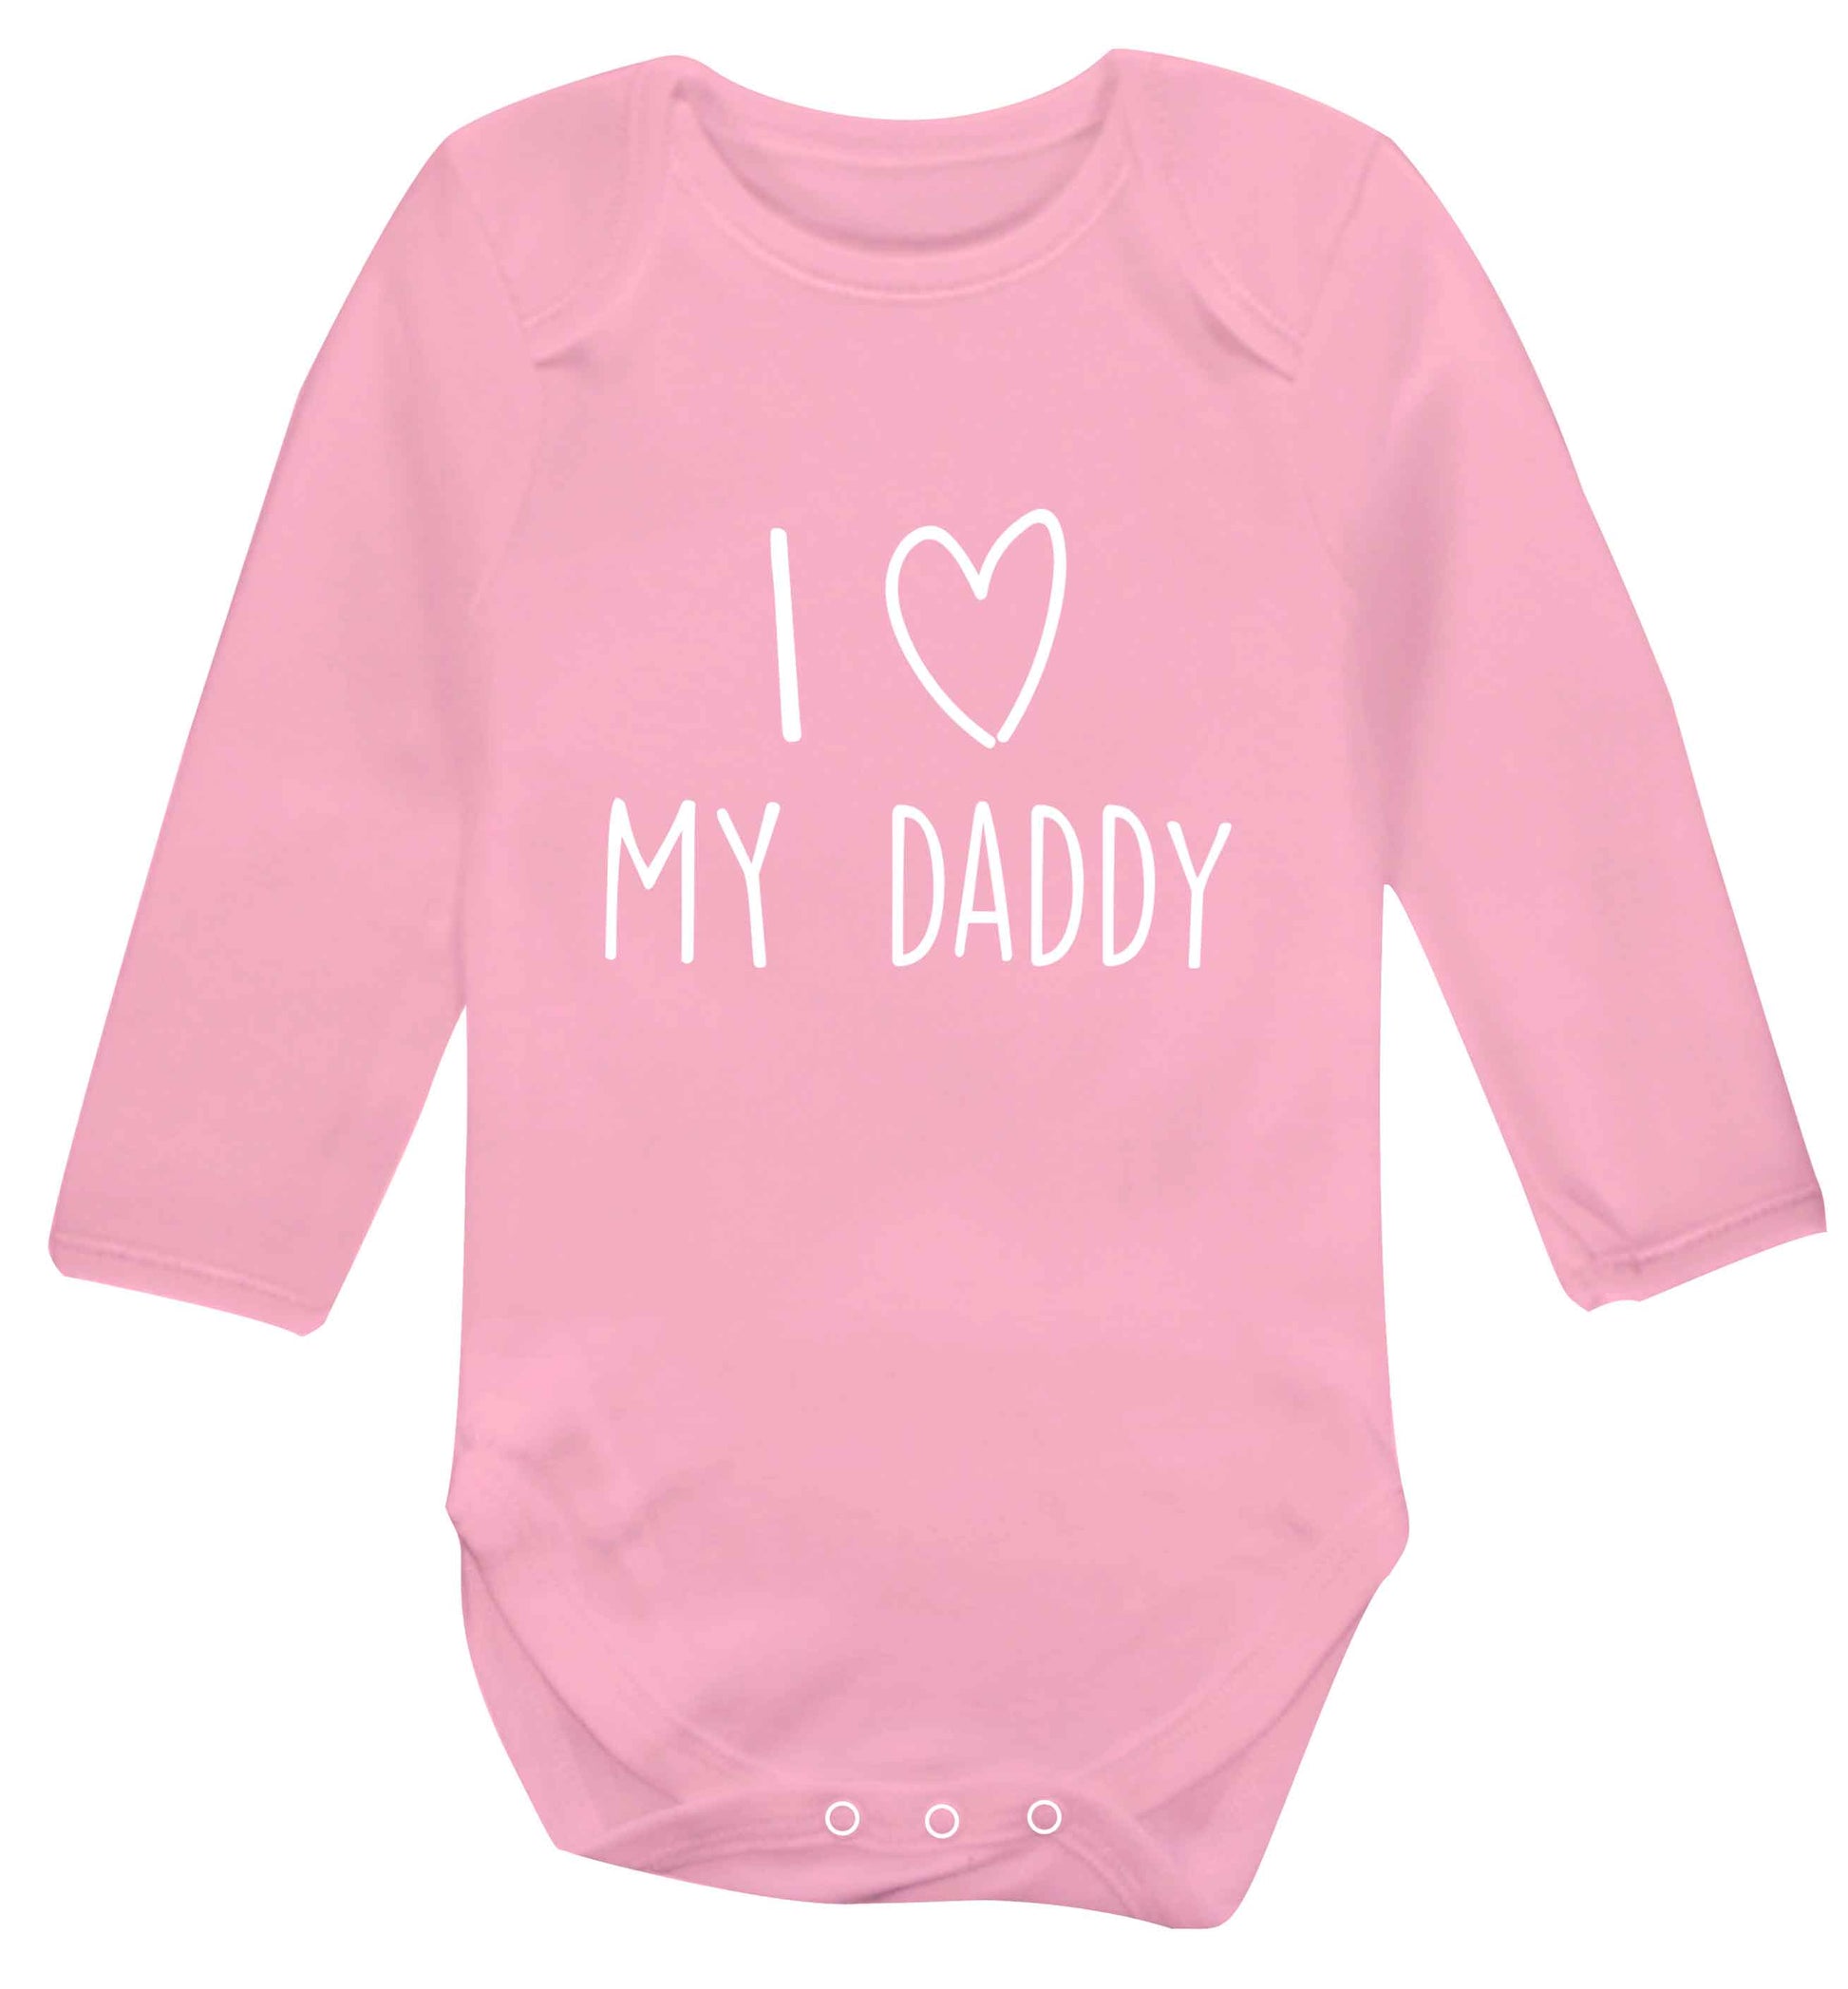 I love my daddy baby vest long sleeved pale pink 6-12 months